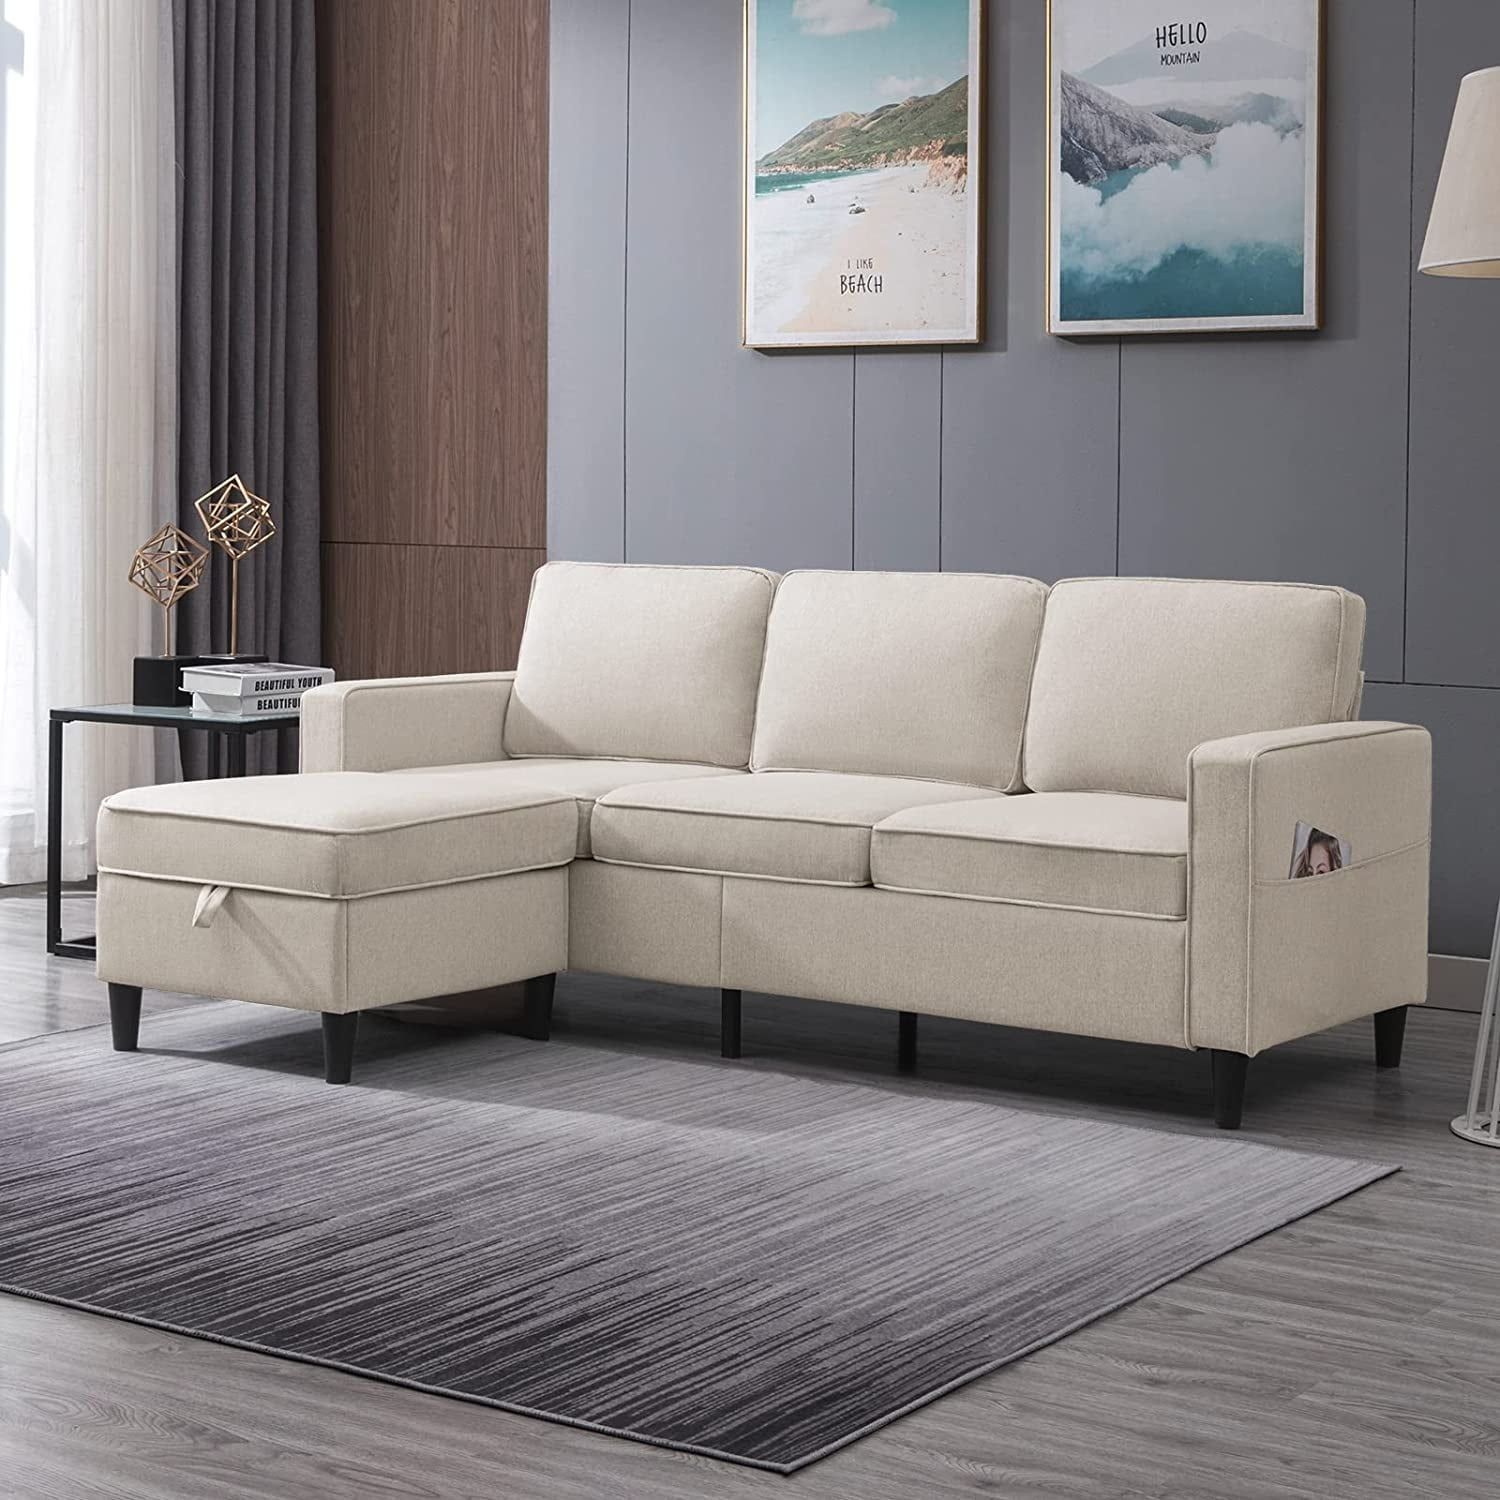 Mixoy Convertible Sectional Sofa Couch, 3 Seat L Shaped Sofa Upholstered  Couch With Flexible Storage Ottoman – On Sale – Bed Bath & Beyond – 36906849 For 3 Seat Convertible Sectional Sofas (View 10 of 15)